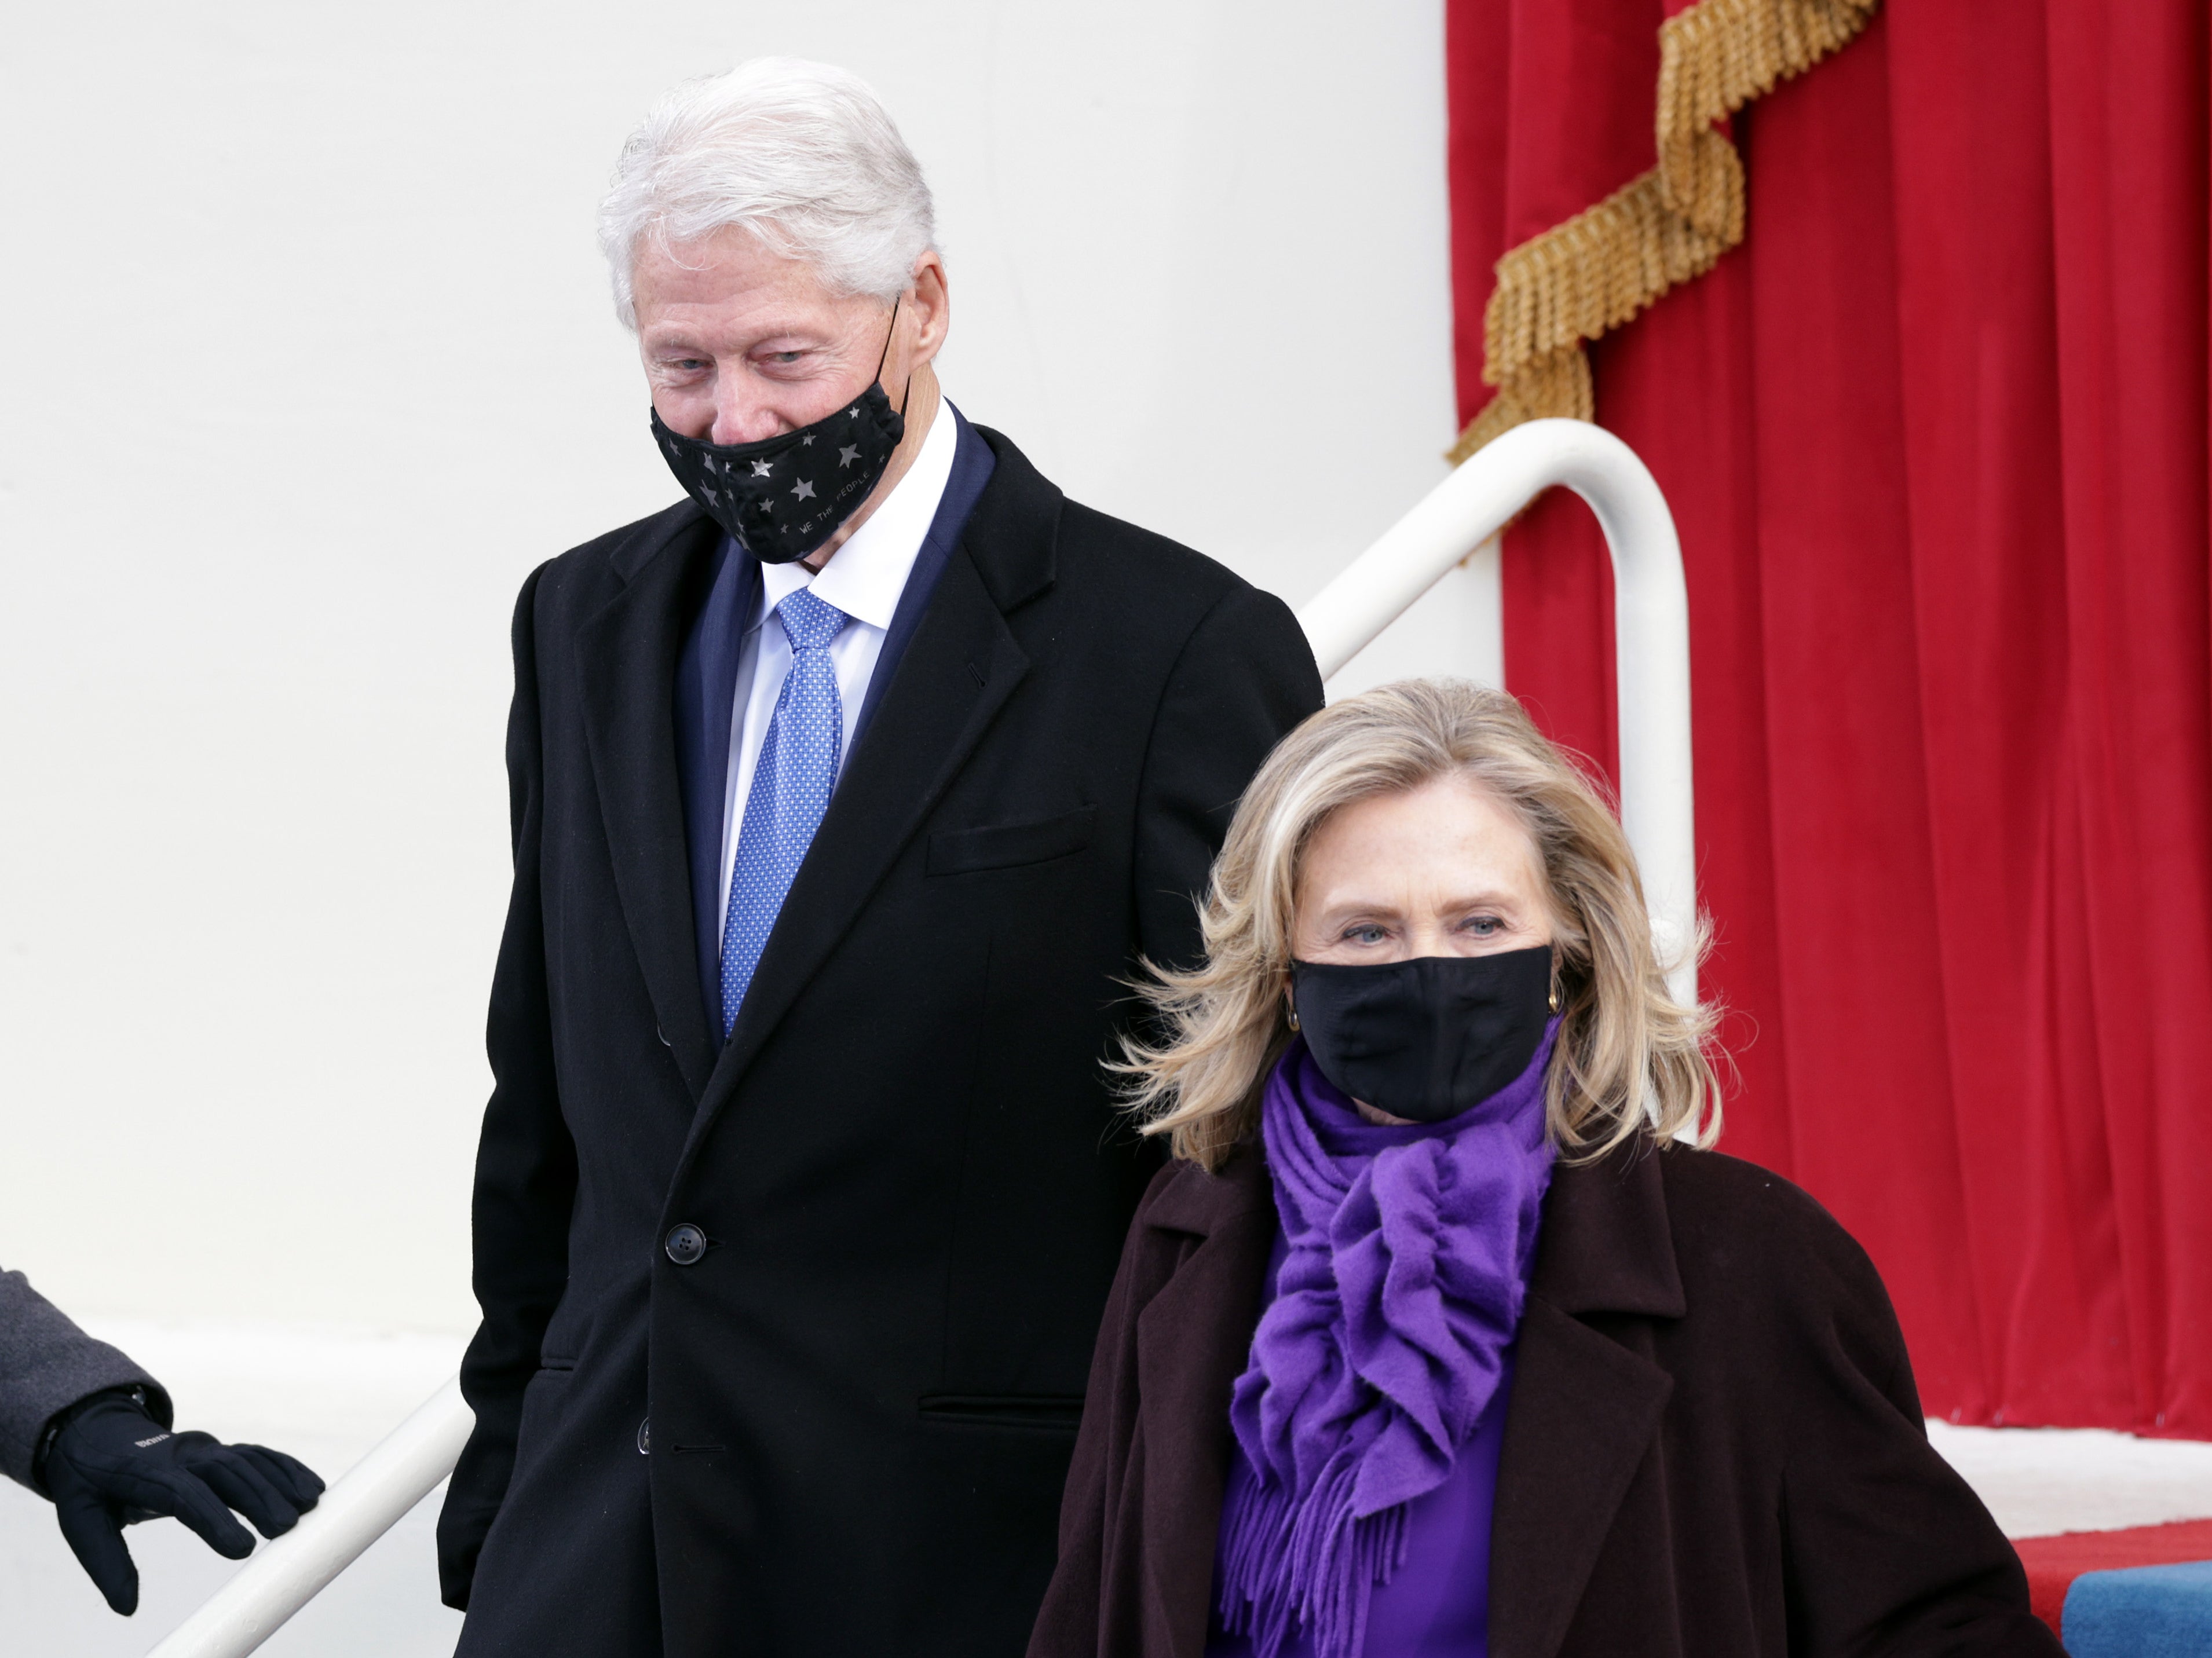 Former president Bill Clinton arrives with former Secretary of State Hillary Clinton for the inauguration of Joe Biden as the 46th President of the United States on the West Front of the Capitol